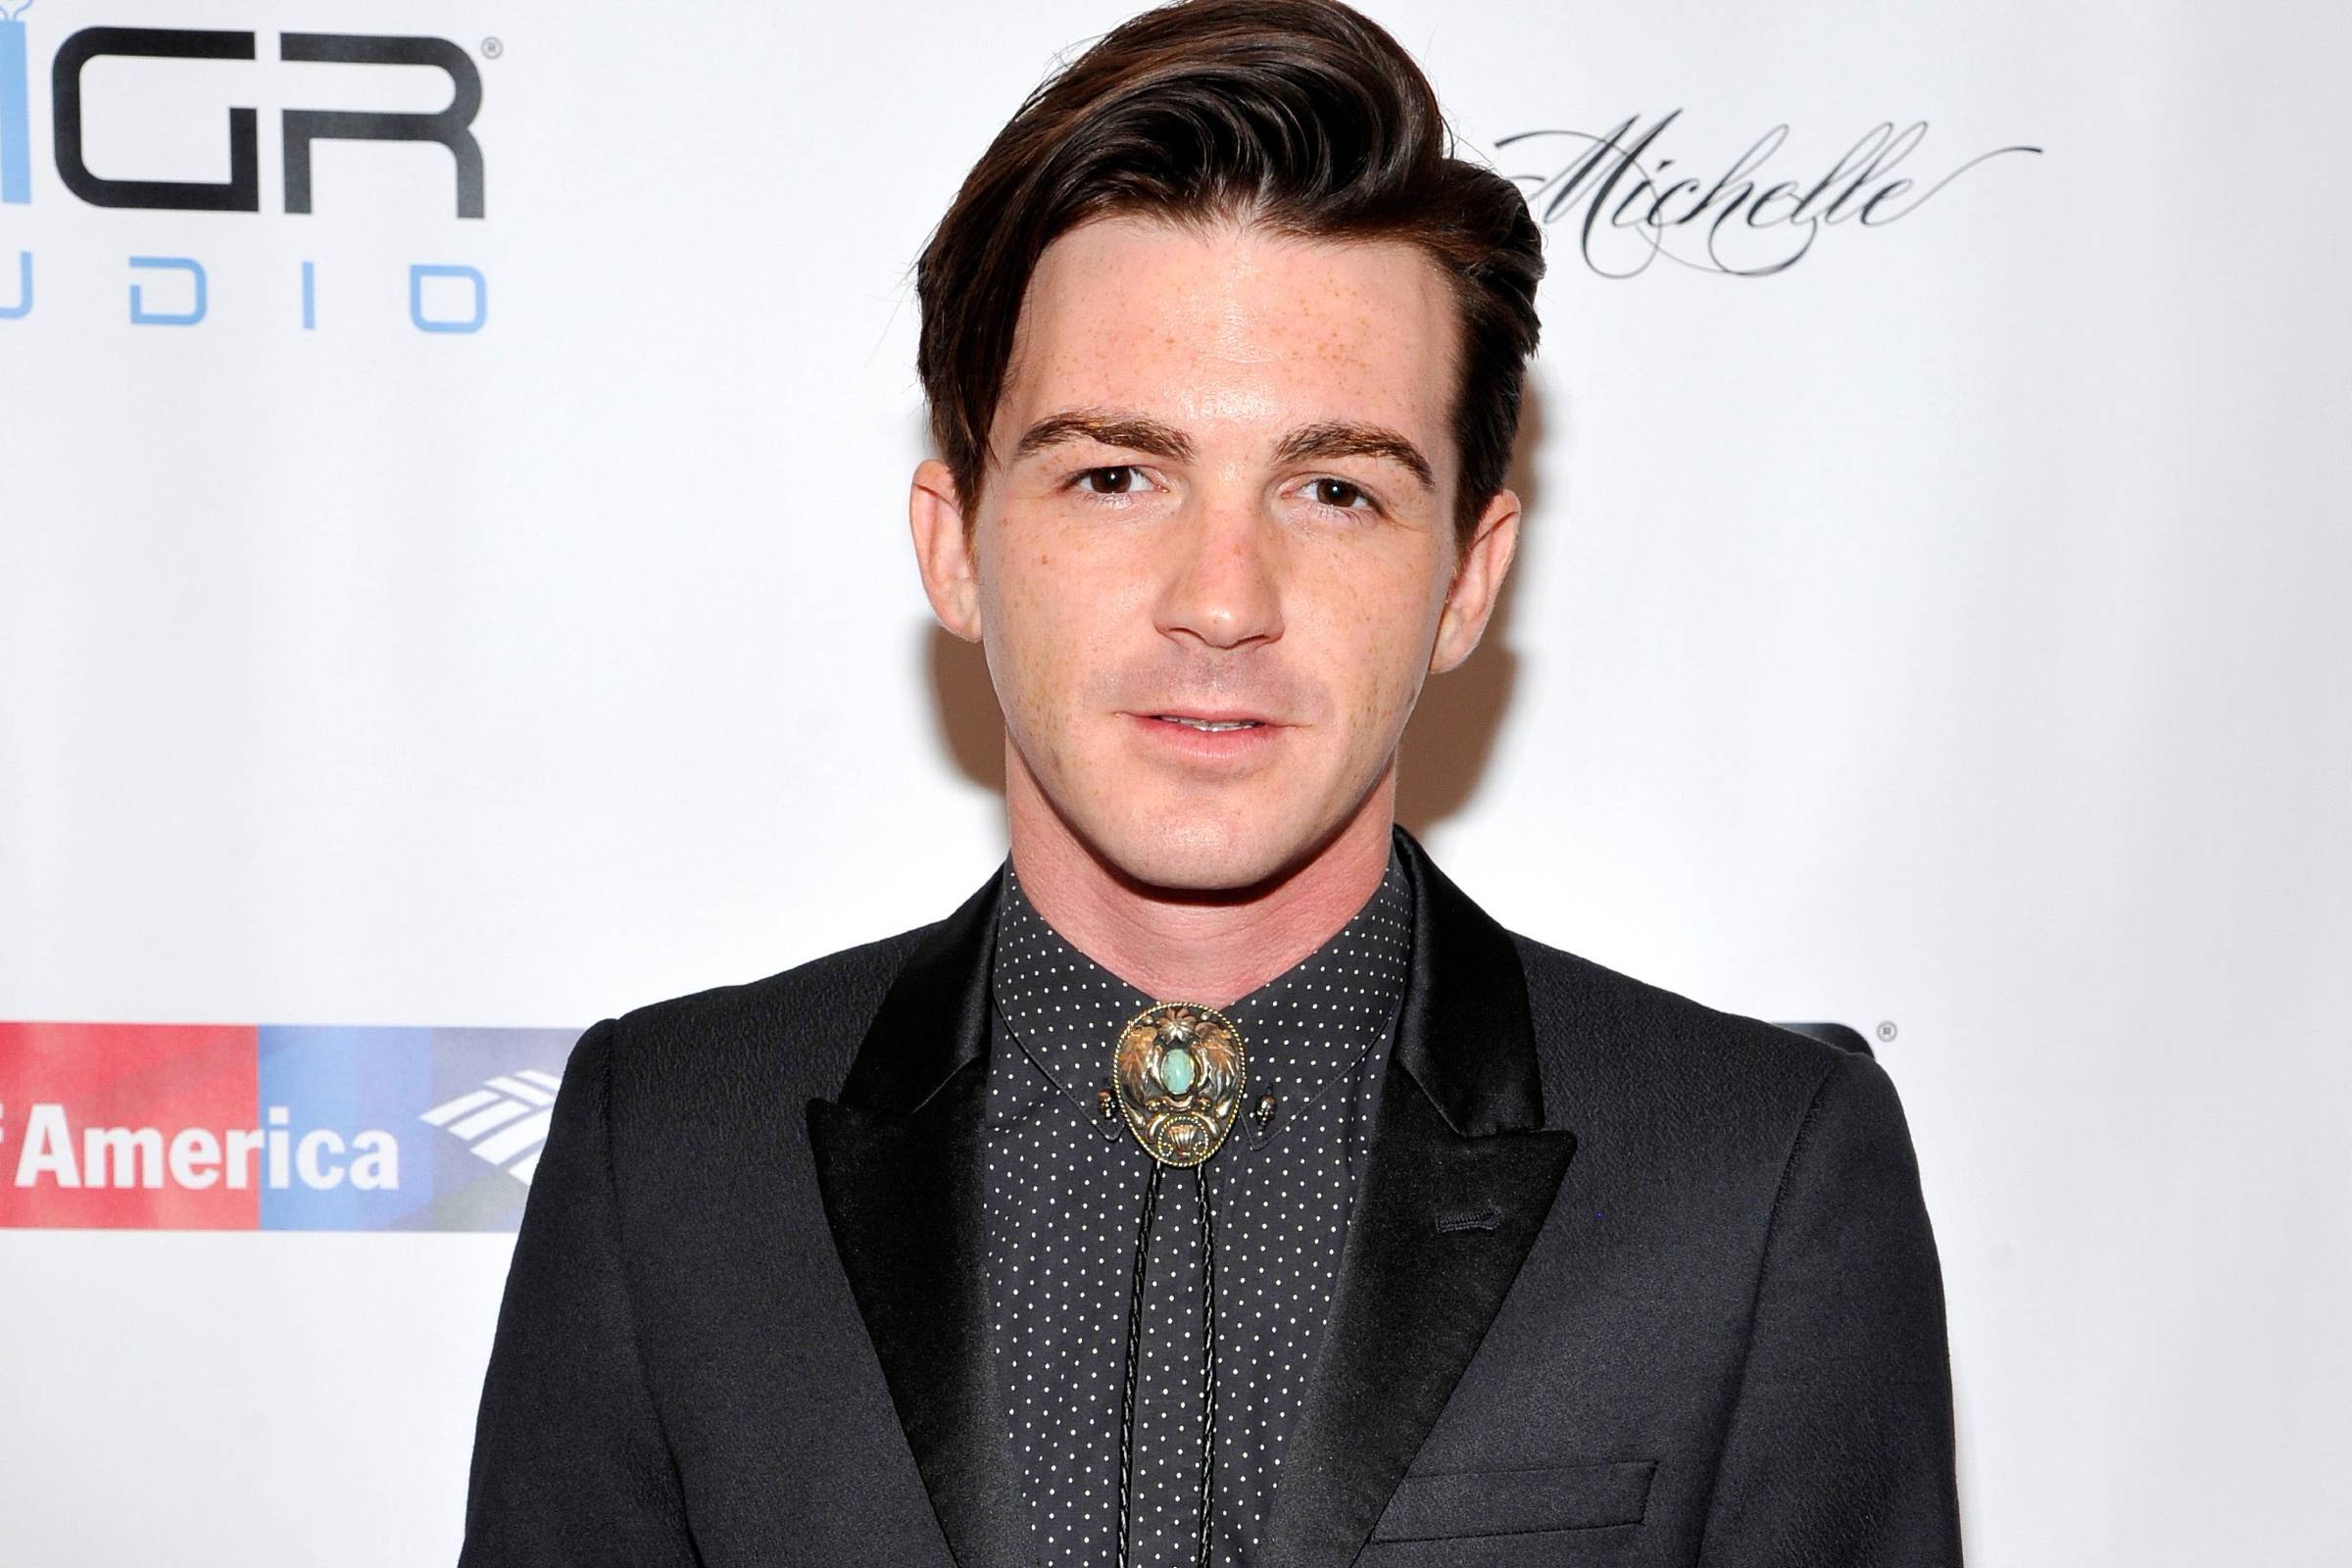 Get the drake bell setlist of the concert at zydeco, birmingham, al, usa on...